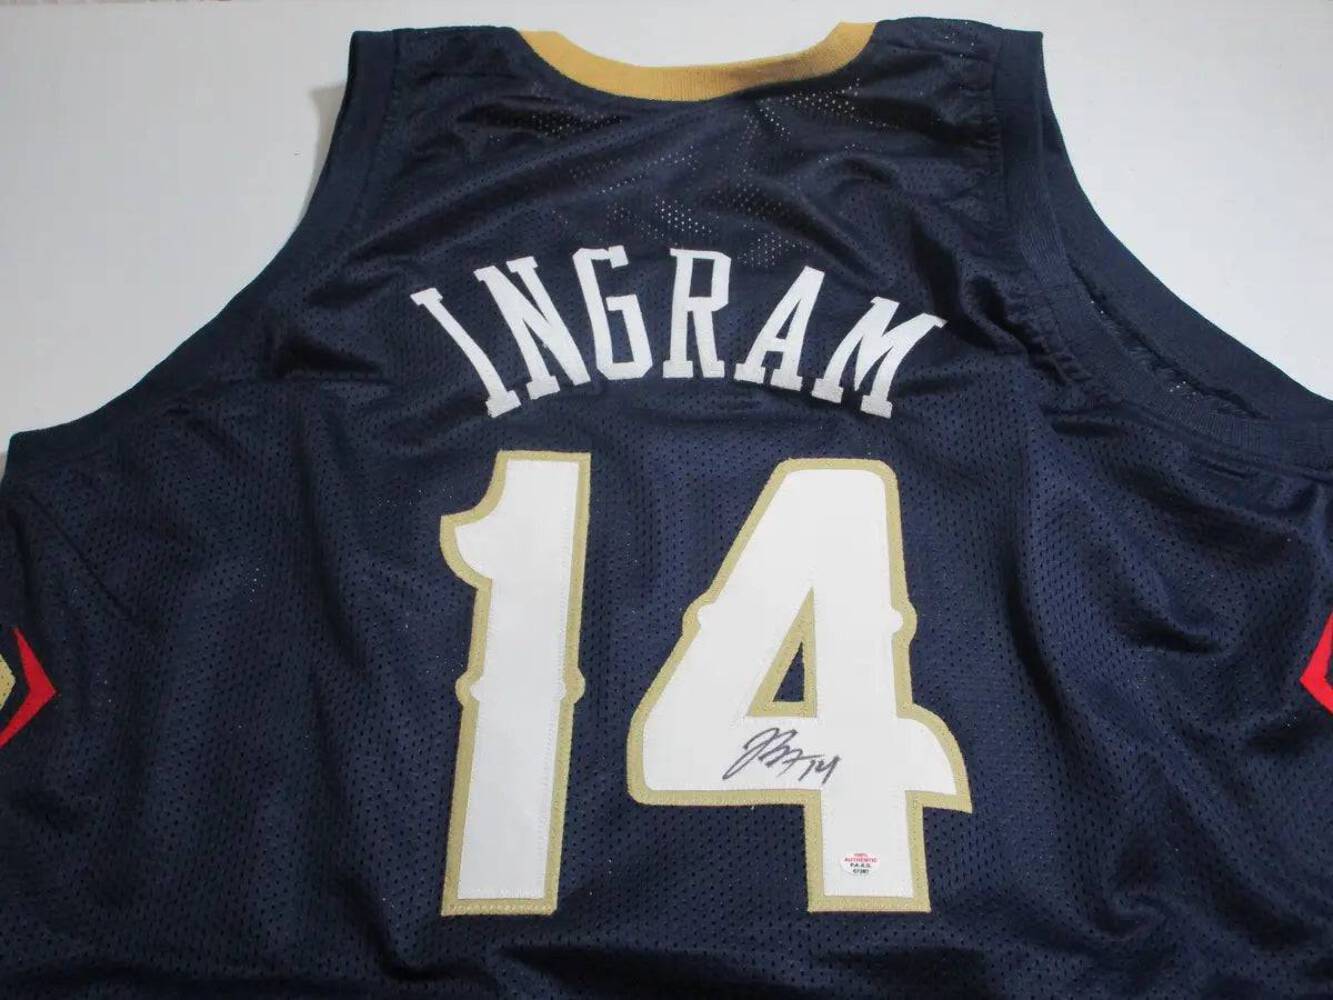 Brandon Ingram of the New Orleans Pelicans signed autographed basketball jersey